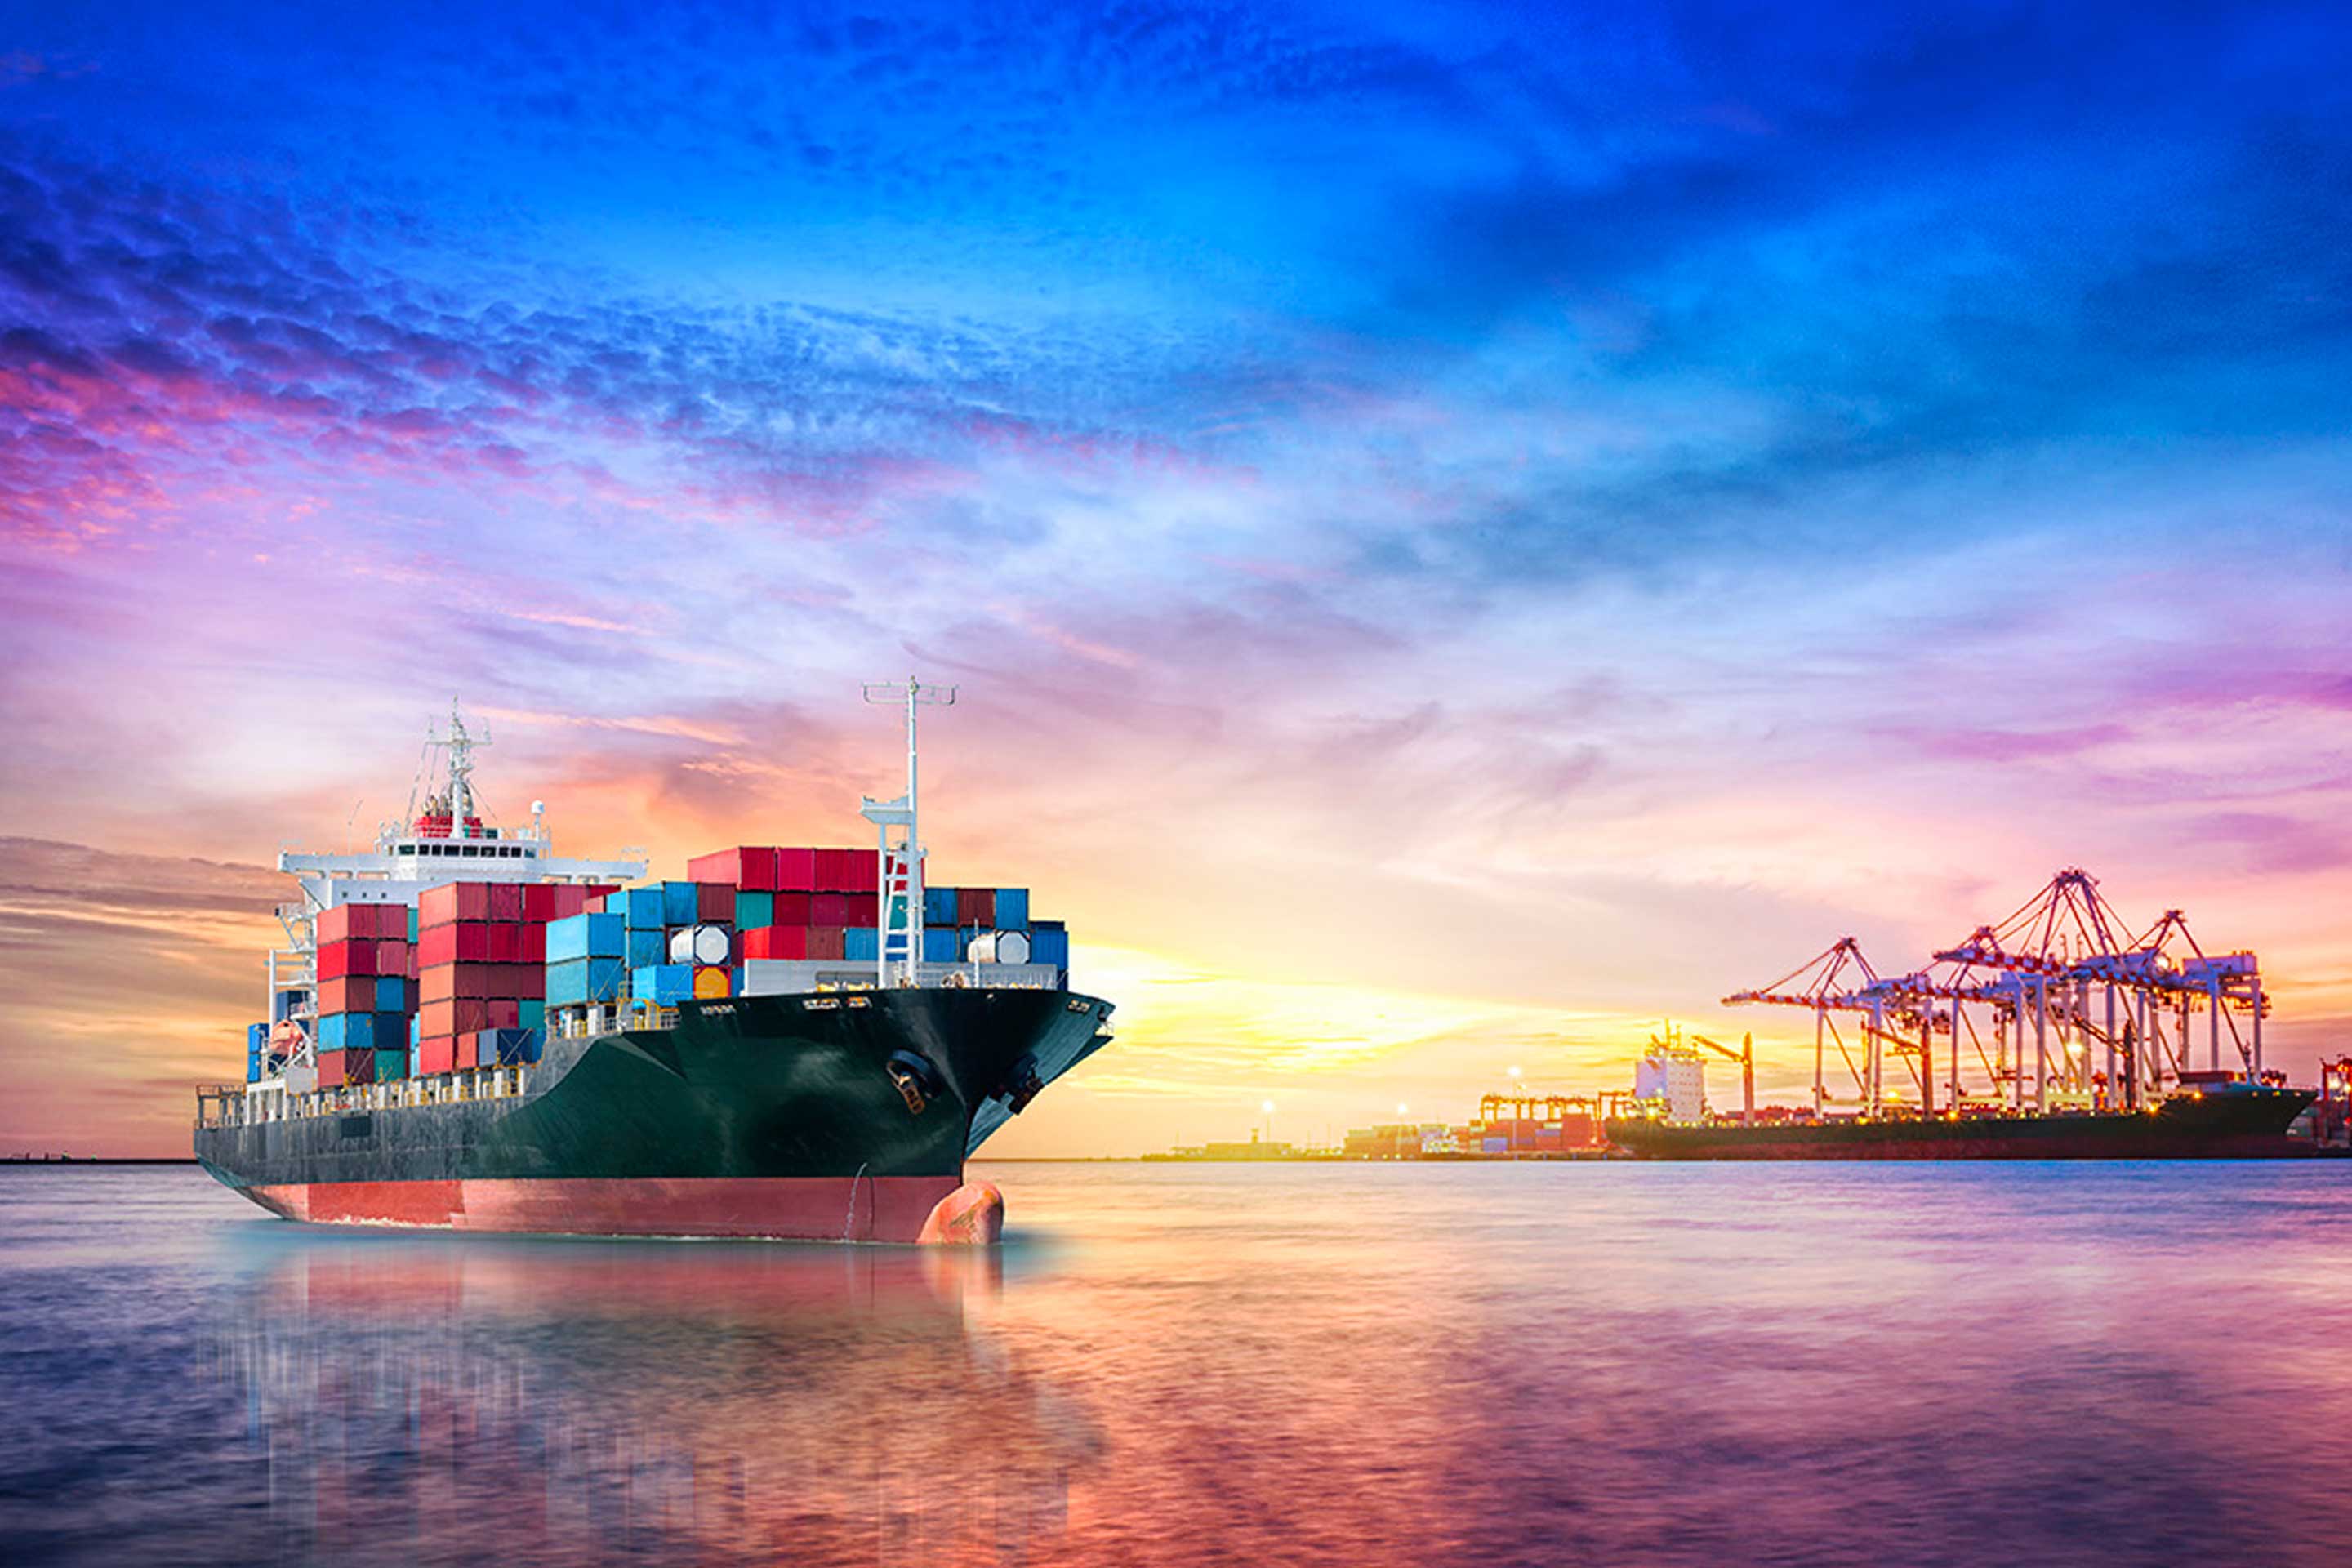 An image of a containership at sunset to highlight Christoph Rofka's interview on decarbonization in the marine industry